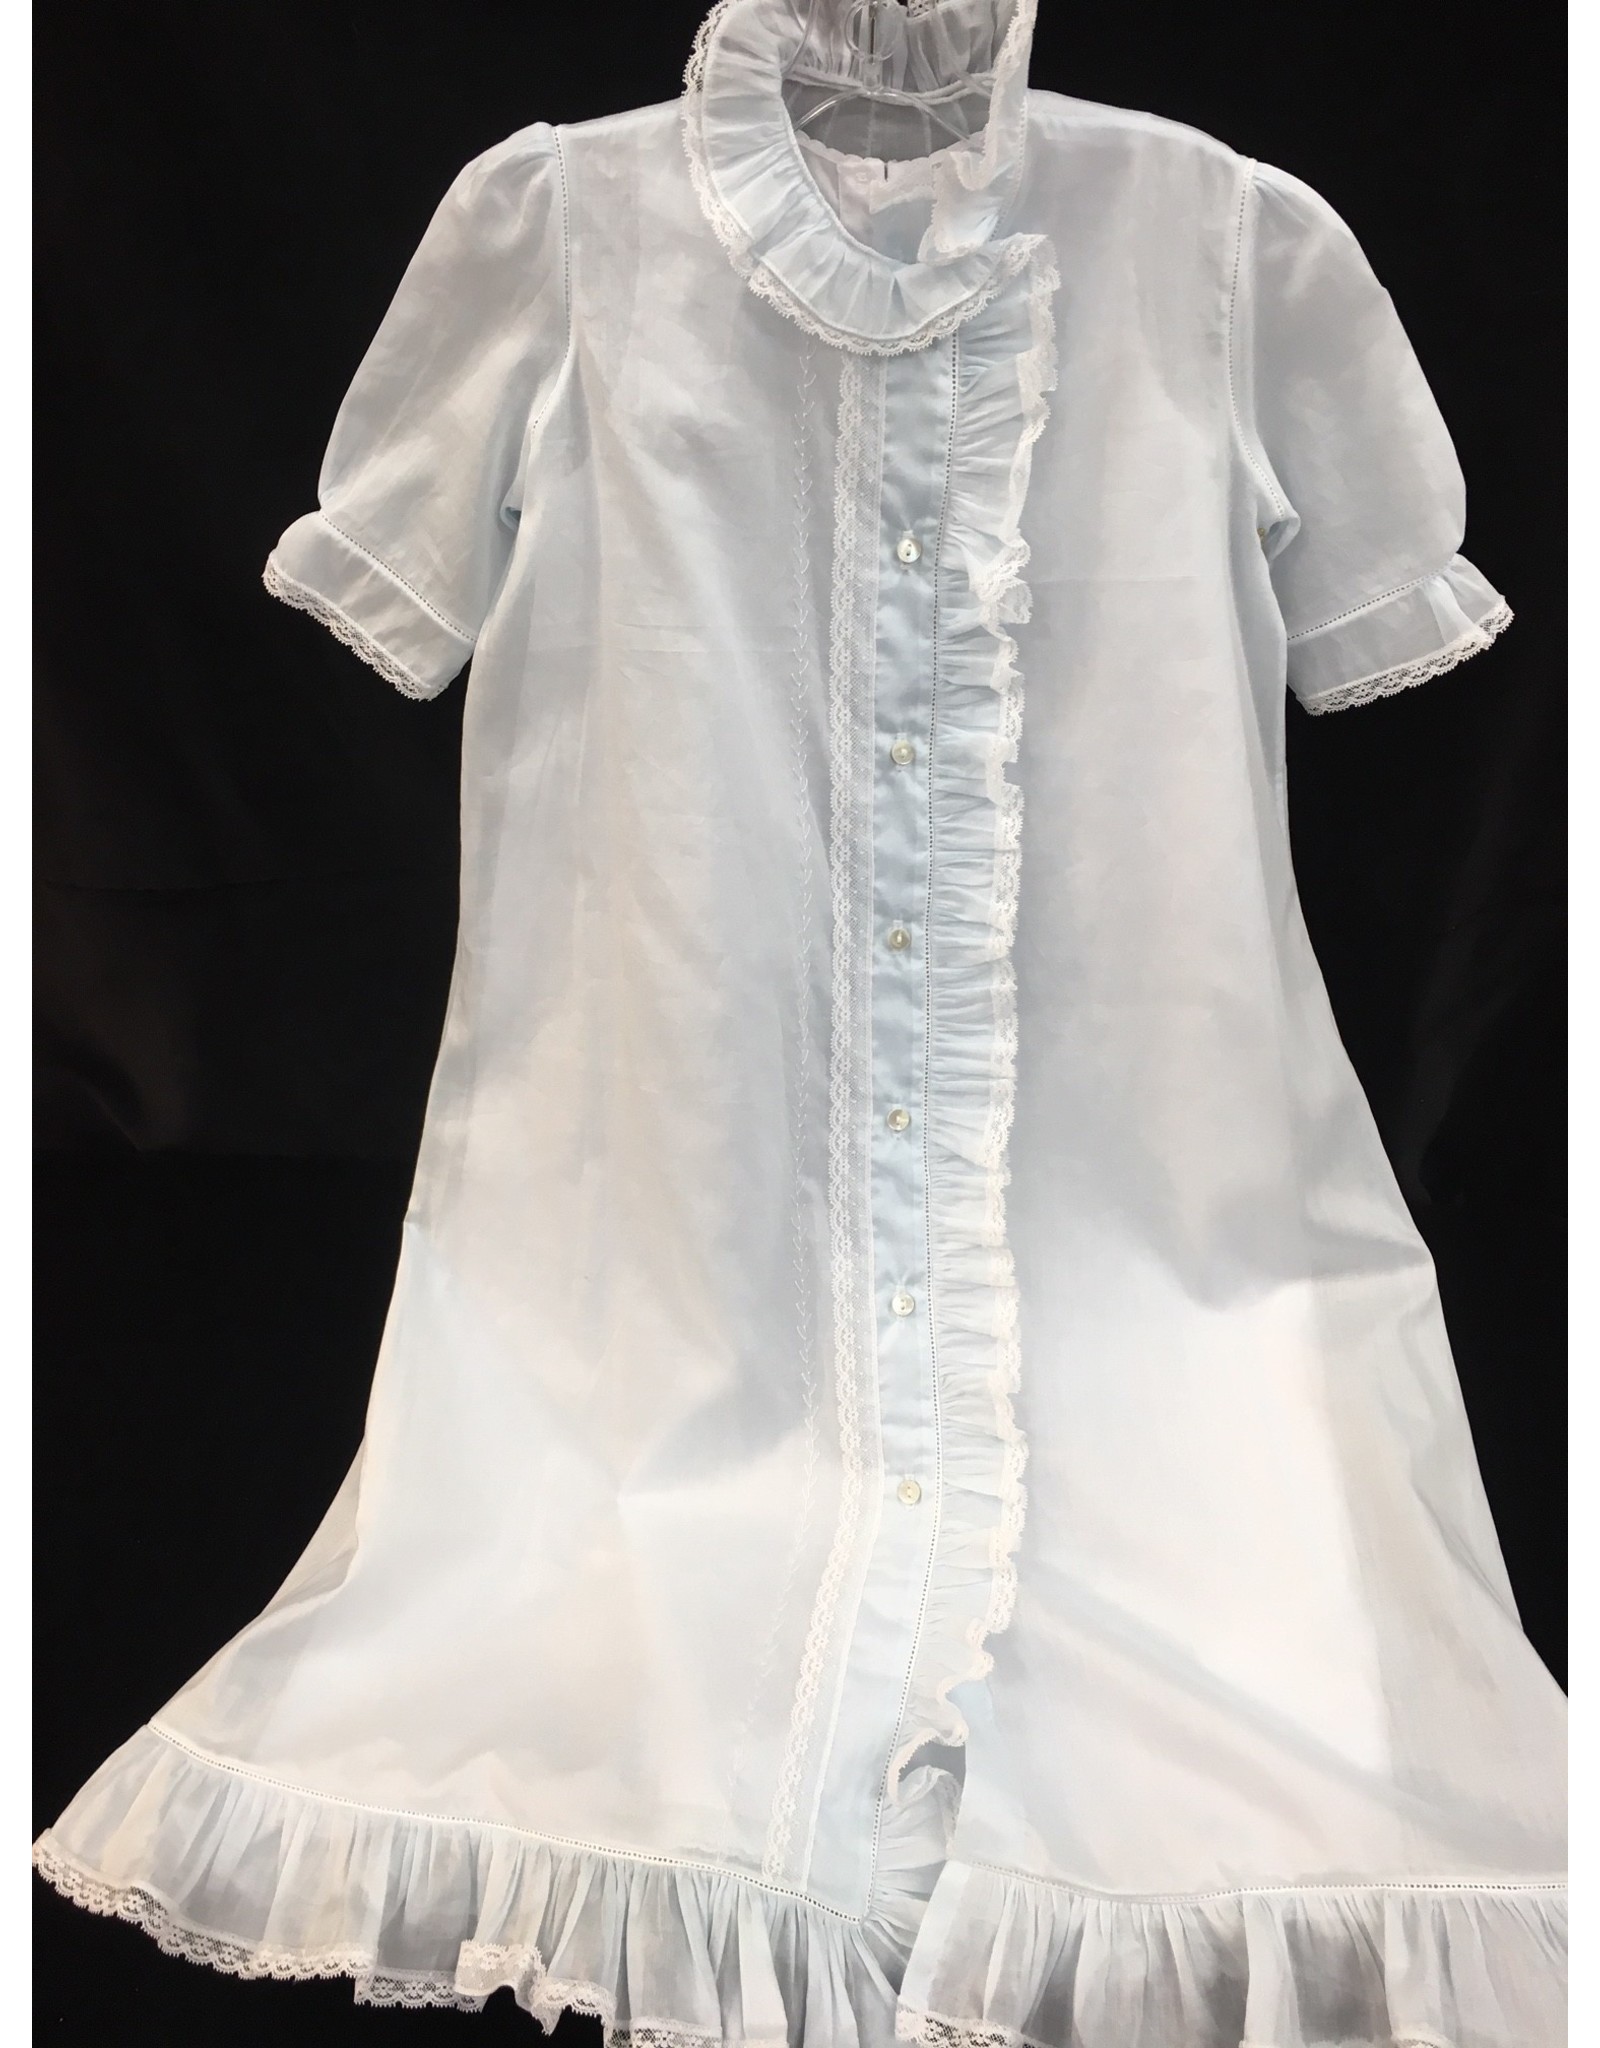 INFANT DAY GOWN LONG WITH FRONT & BOTTOM RUFFLE